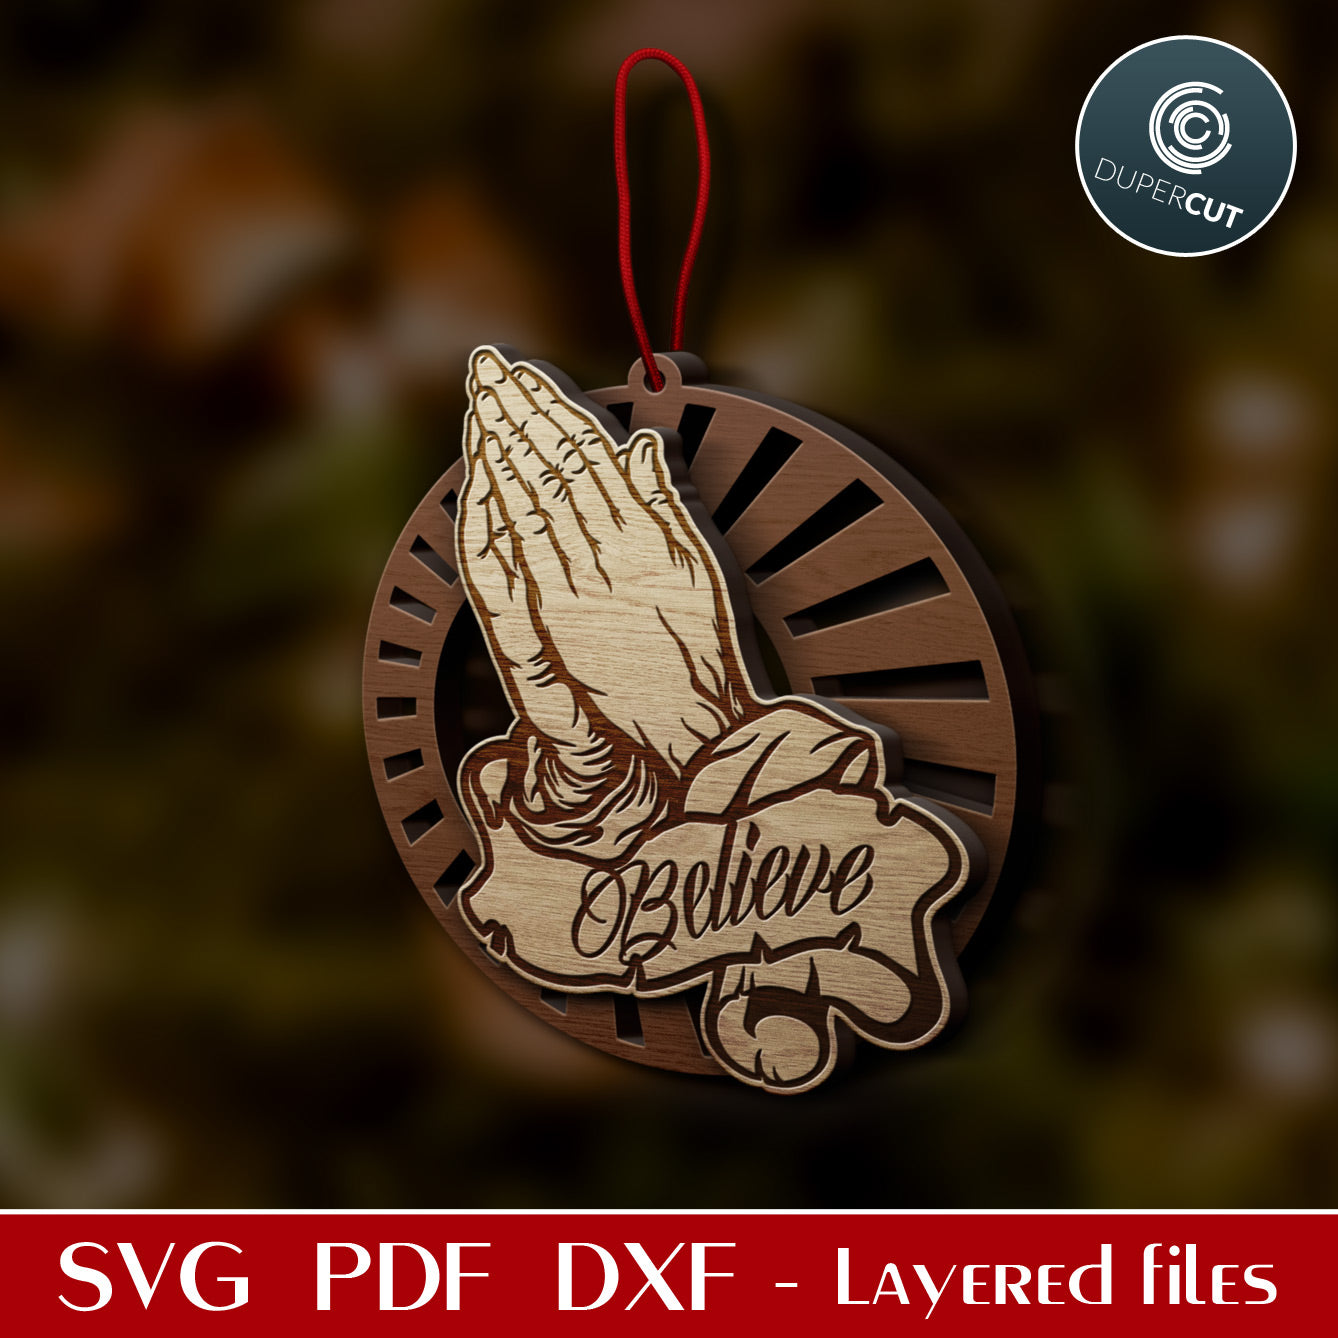 Praying hands Christmas ornaments - layered SVG DXF files for laser cutting and engraving. Glowforge, Cricut, Silhouette, CNC plasma machines.